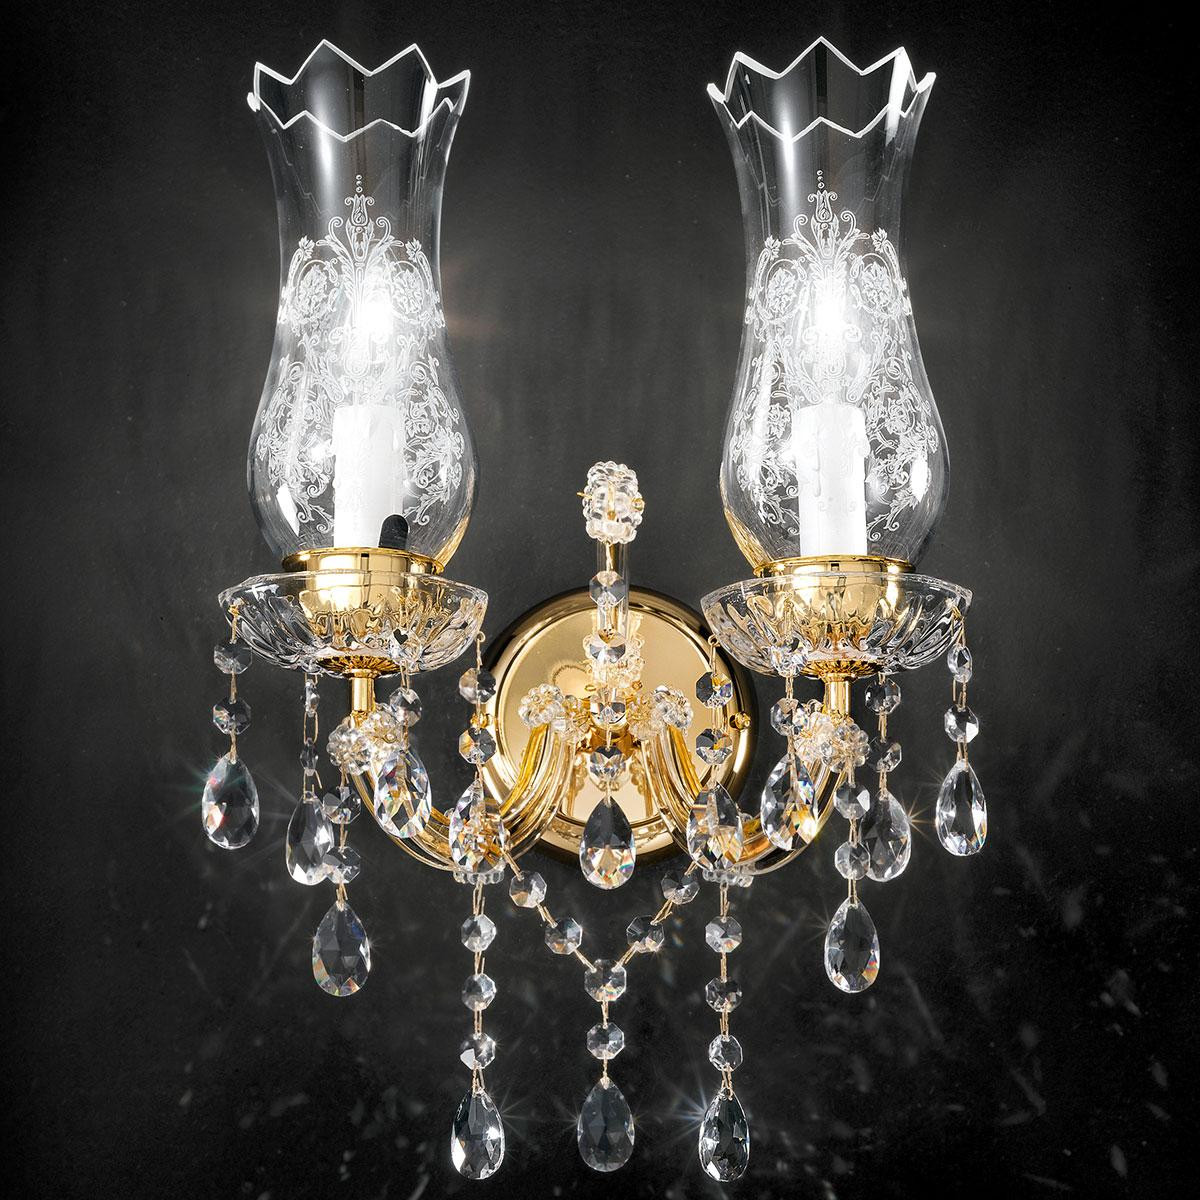 "Michelangelo" venetian crystal wall sconce - 2 lights - transparent with Asfour venetian crystal